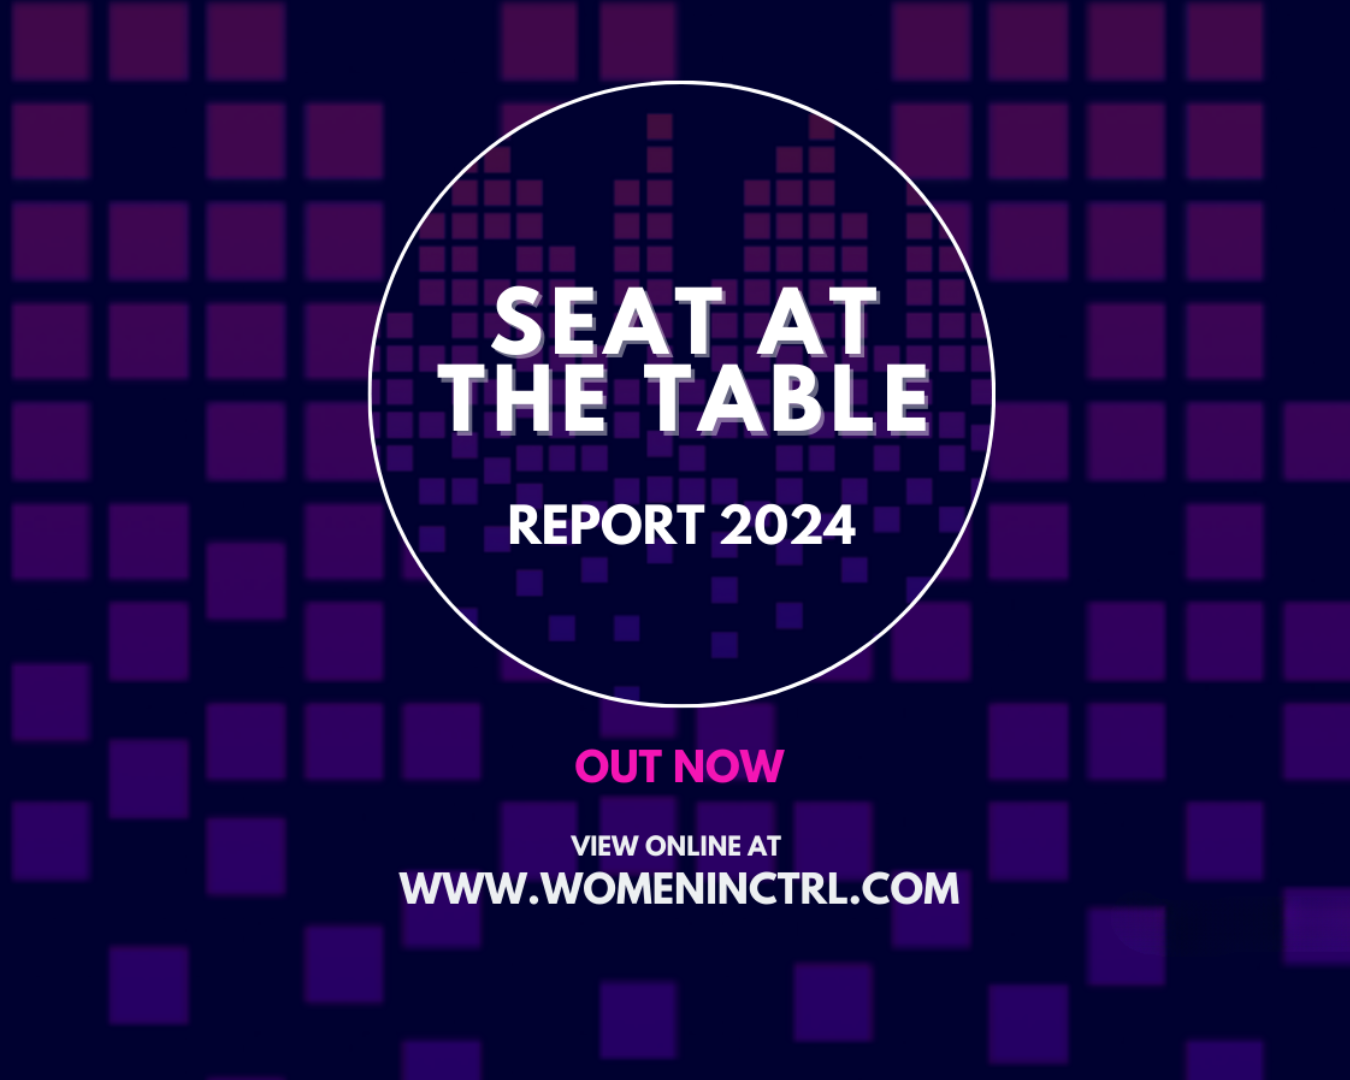 Women in CTRL ‘Seat at the Table’ Report